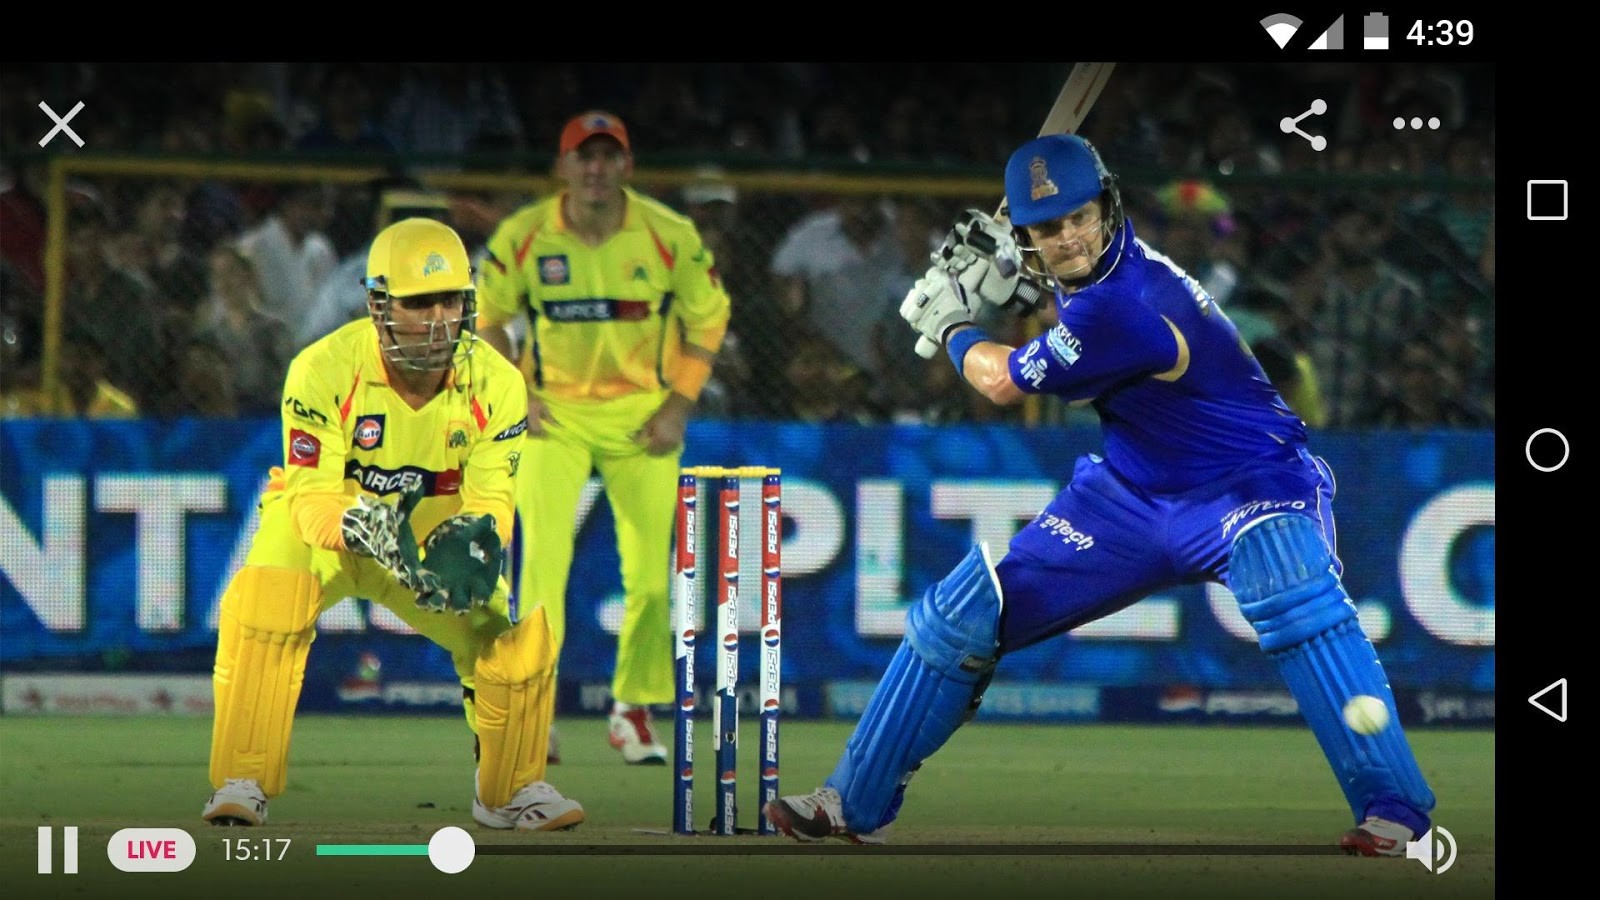 Hotstar Android App: Watch Live Cricket Match Online ...